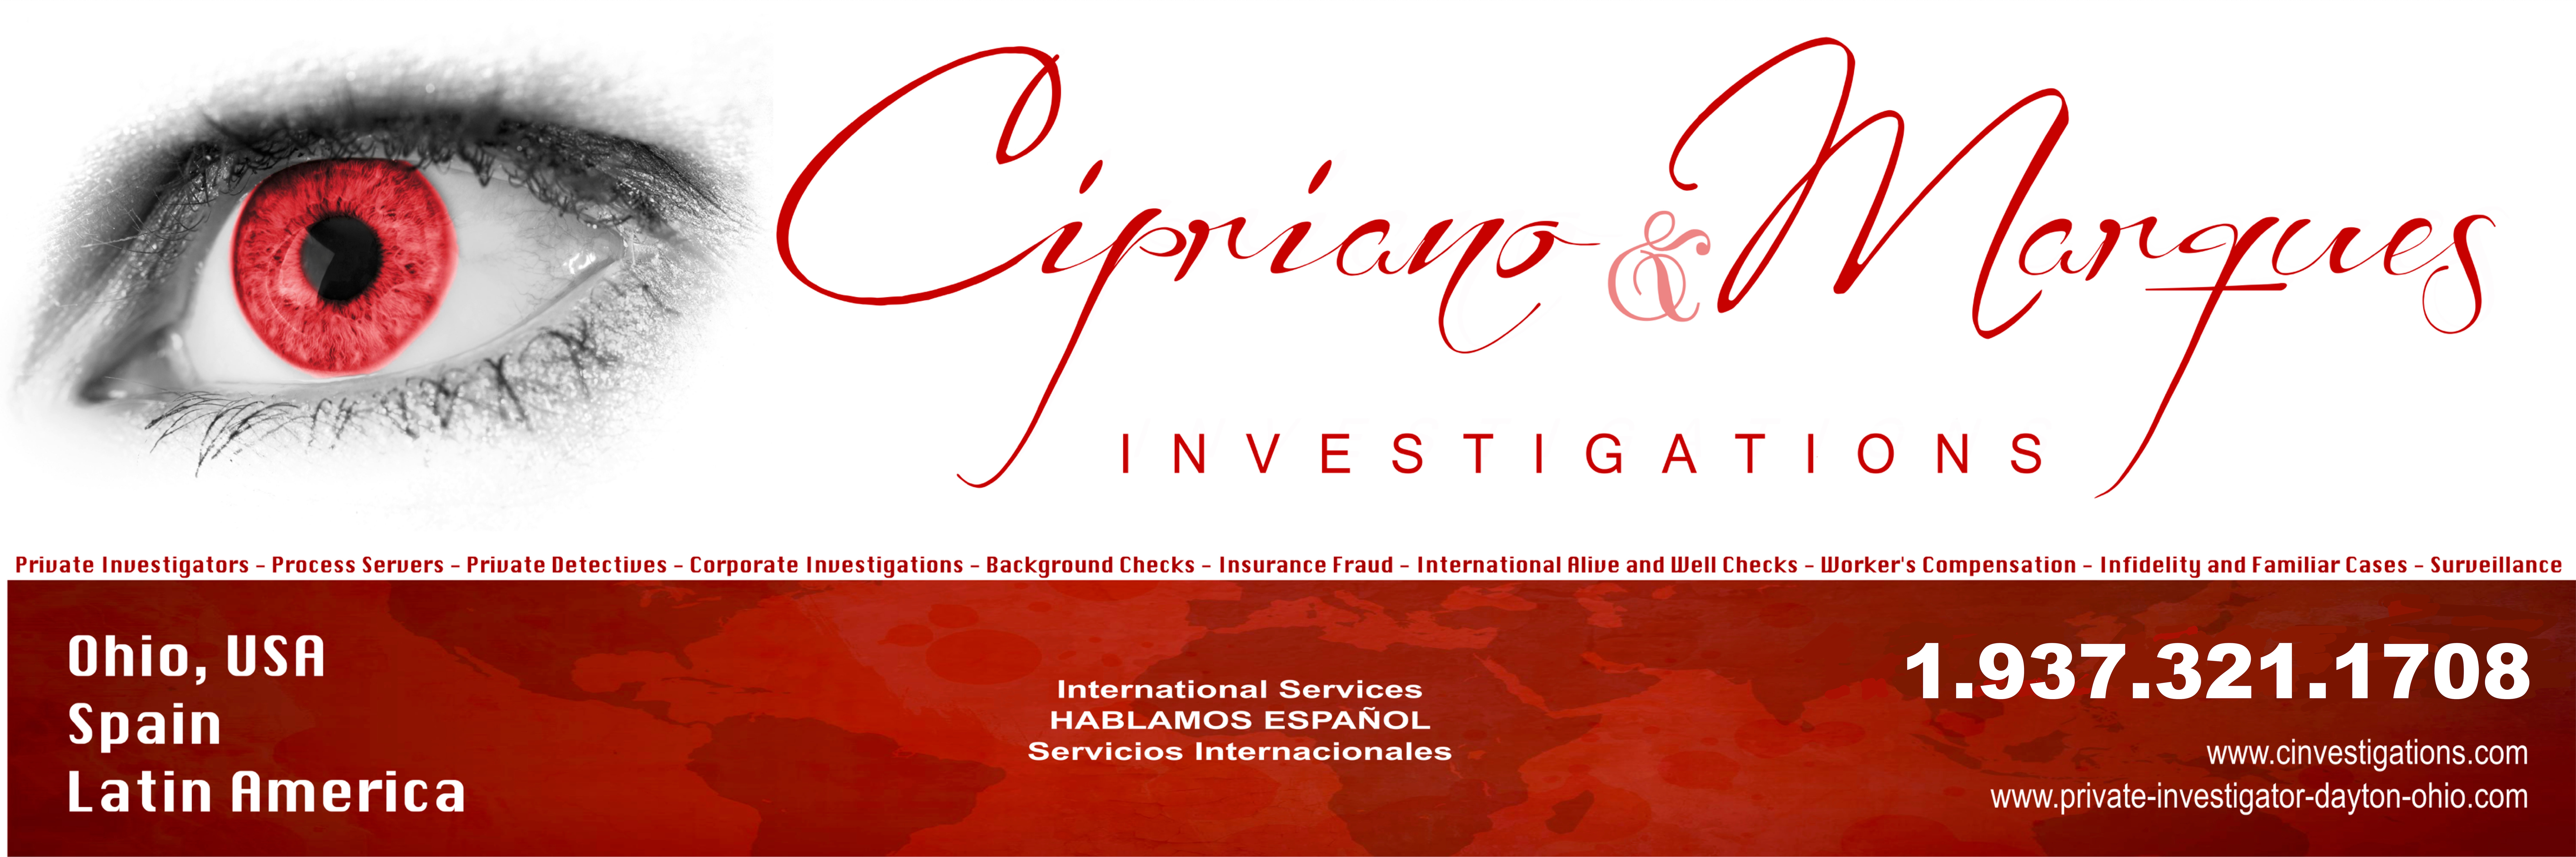 Cipriano and Marques Investigations Photo